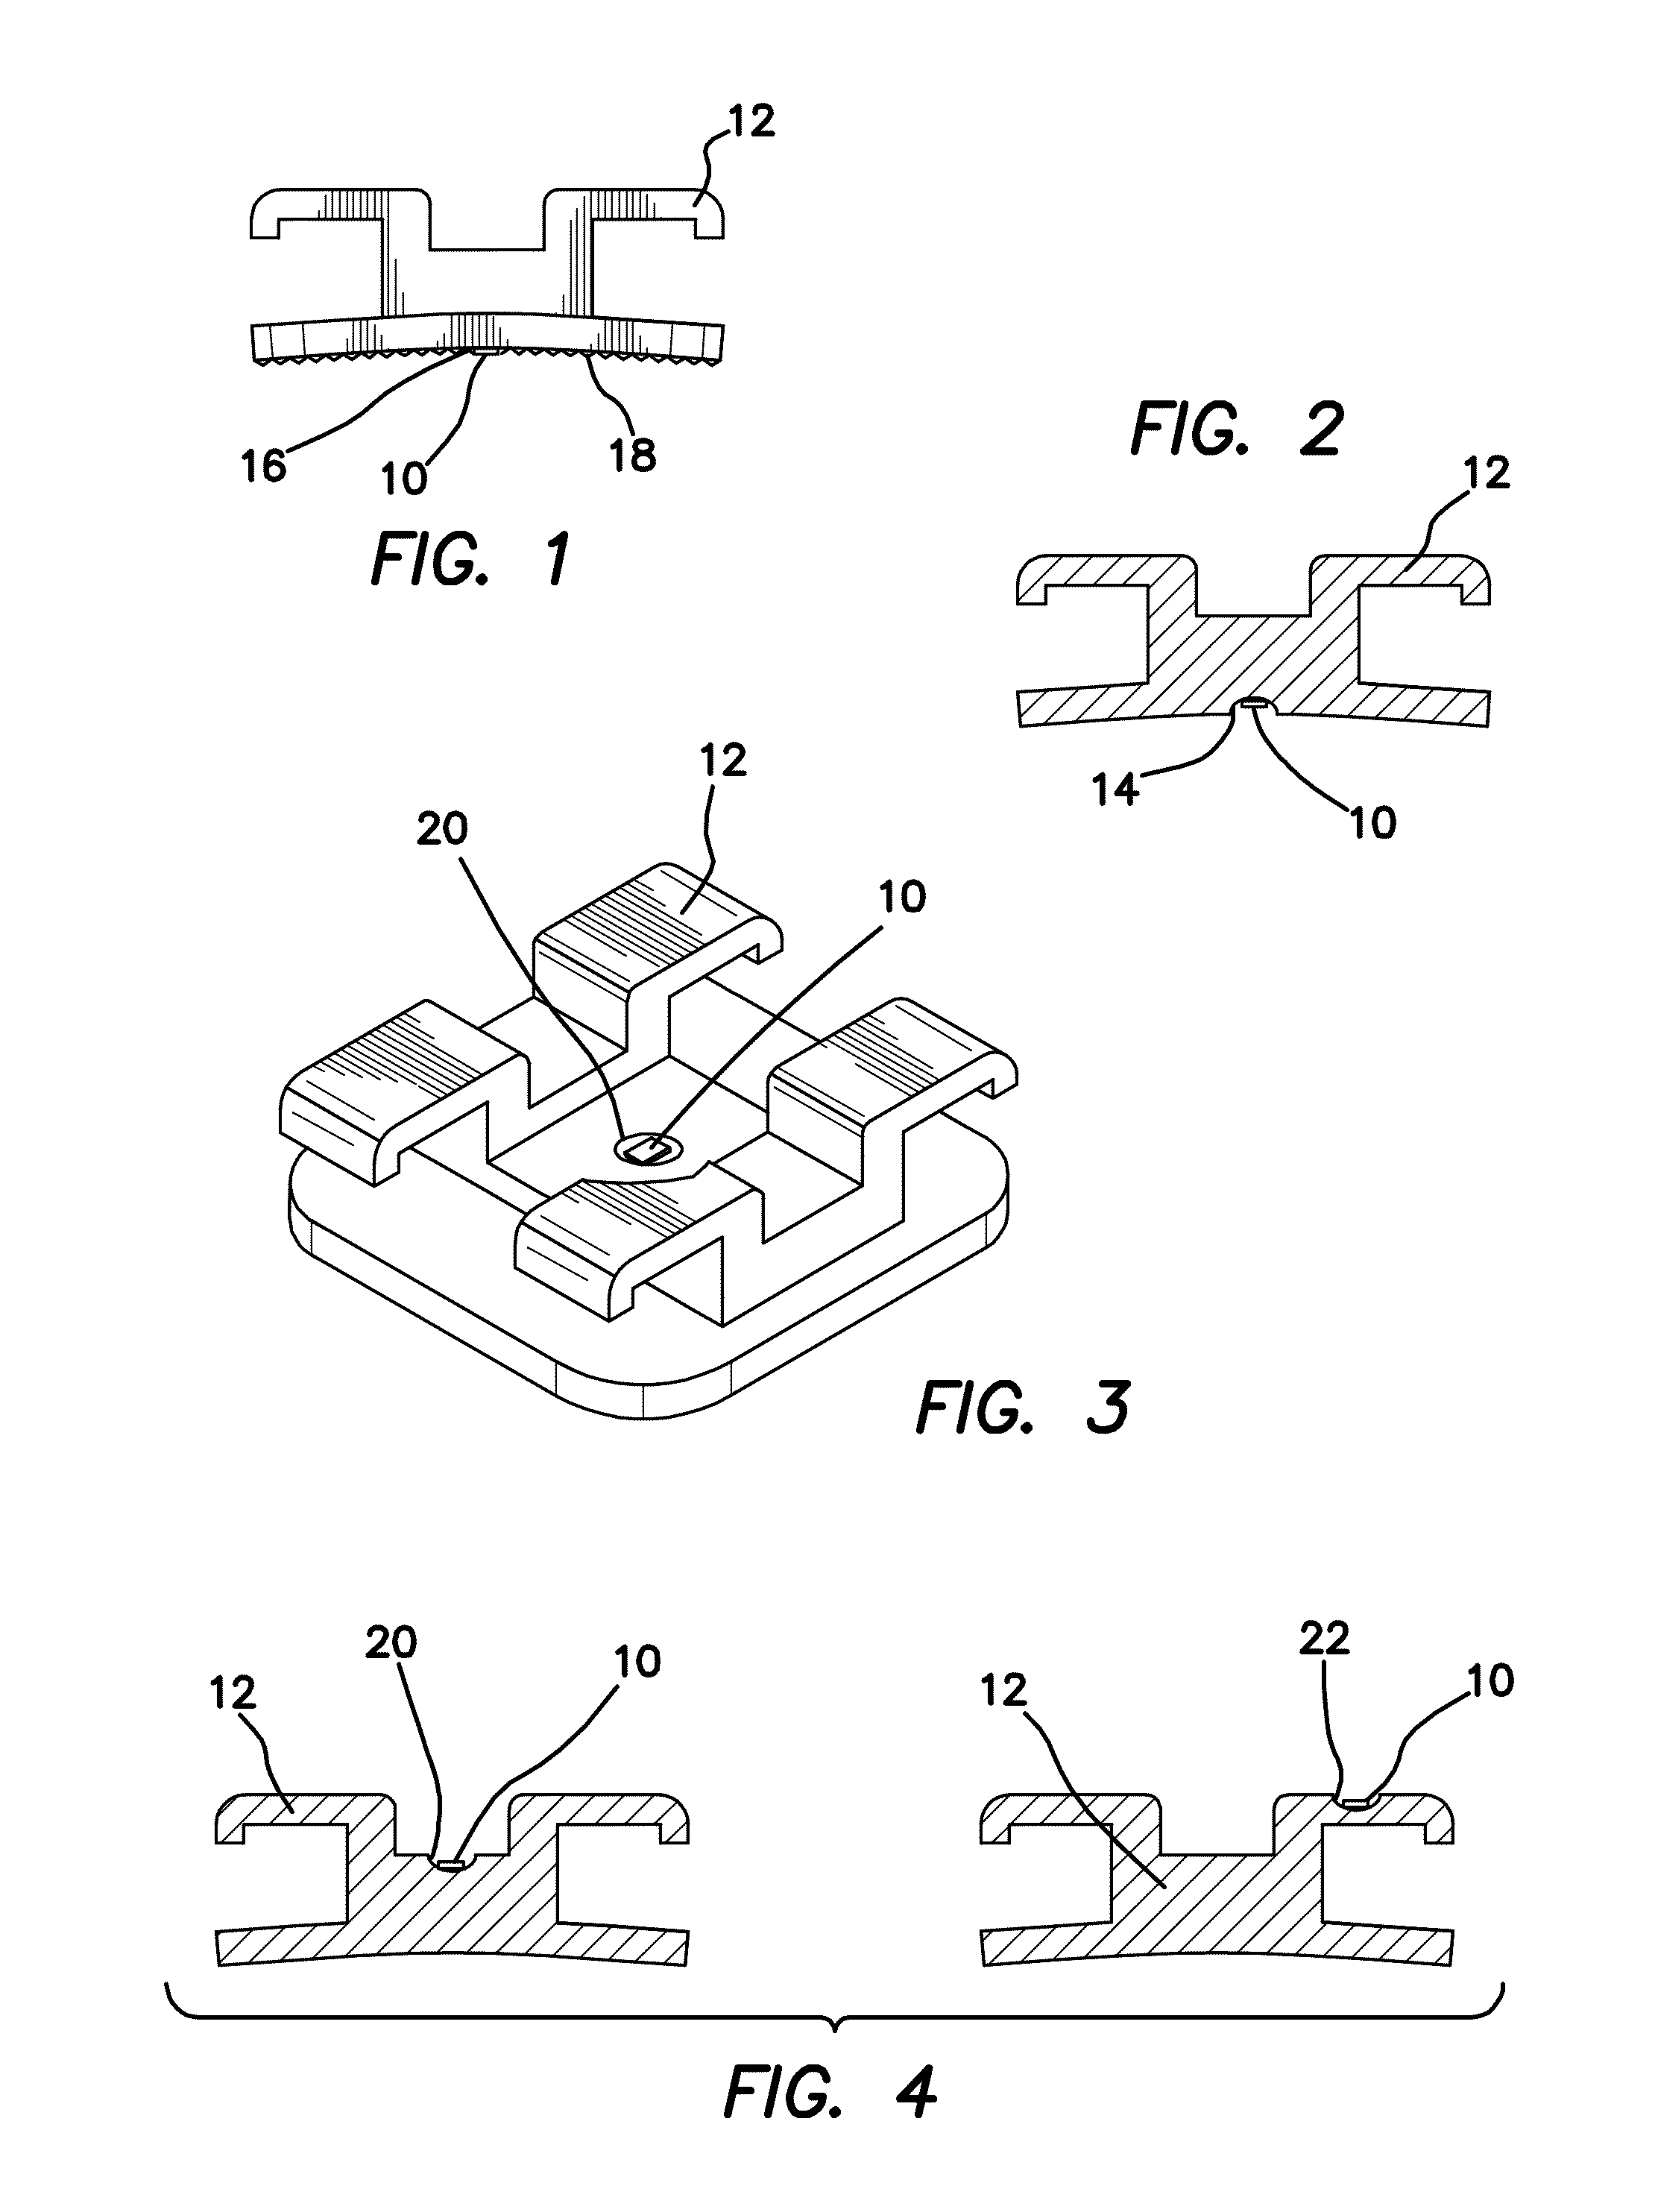 Method for Using Radio Frequency Identification Microchips in Orthodontic Brackets